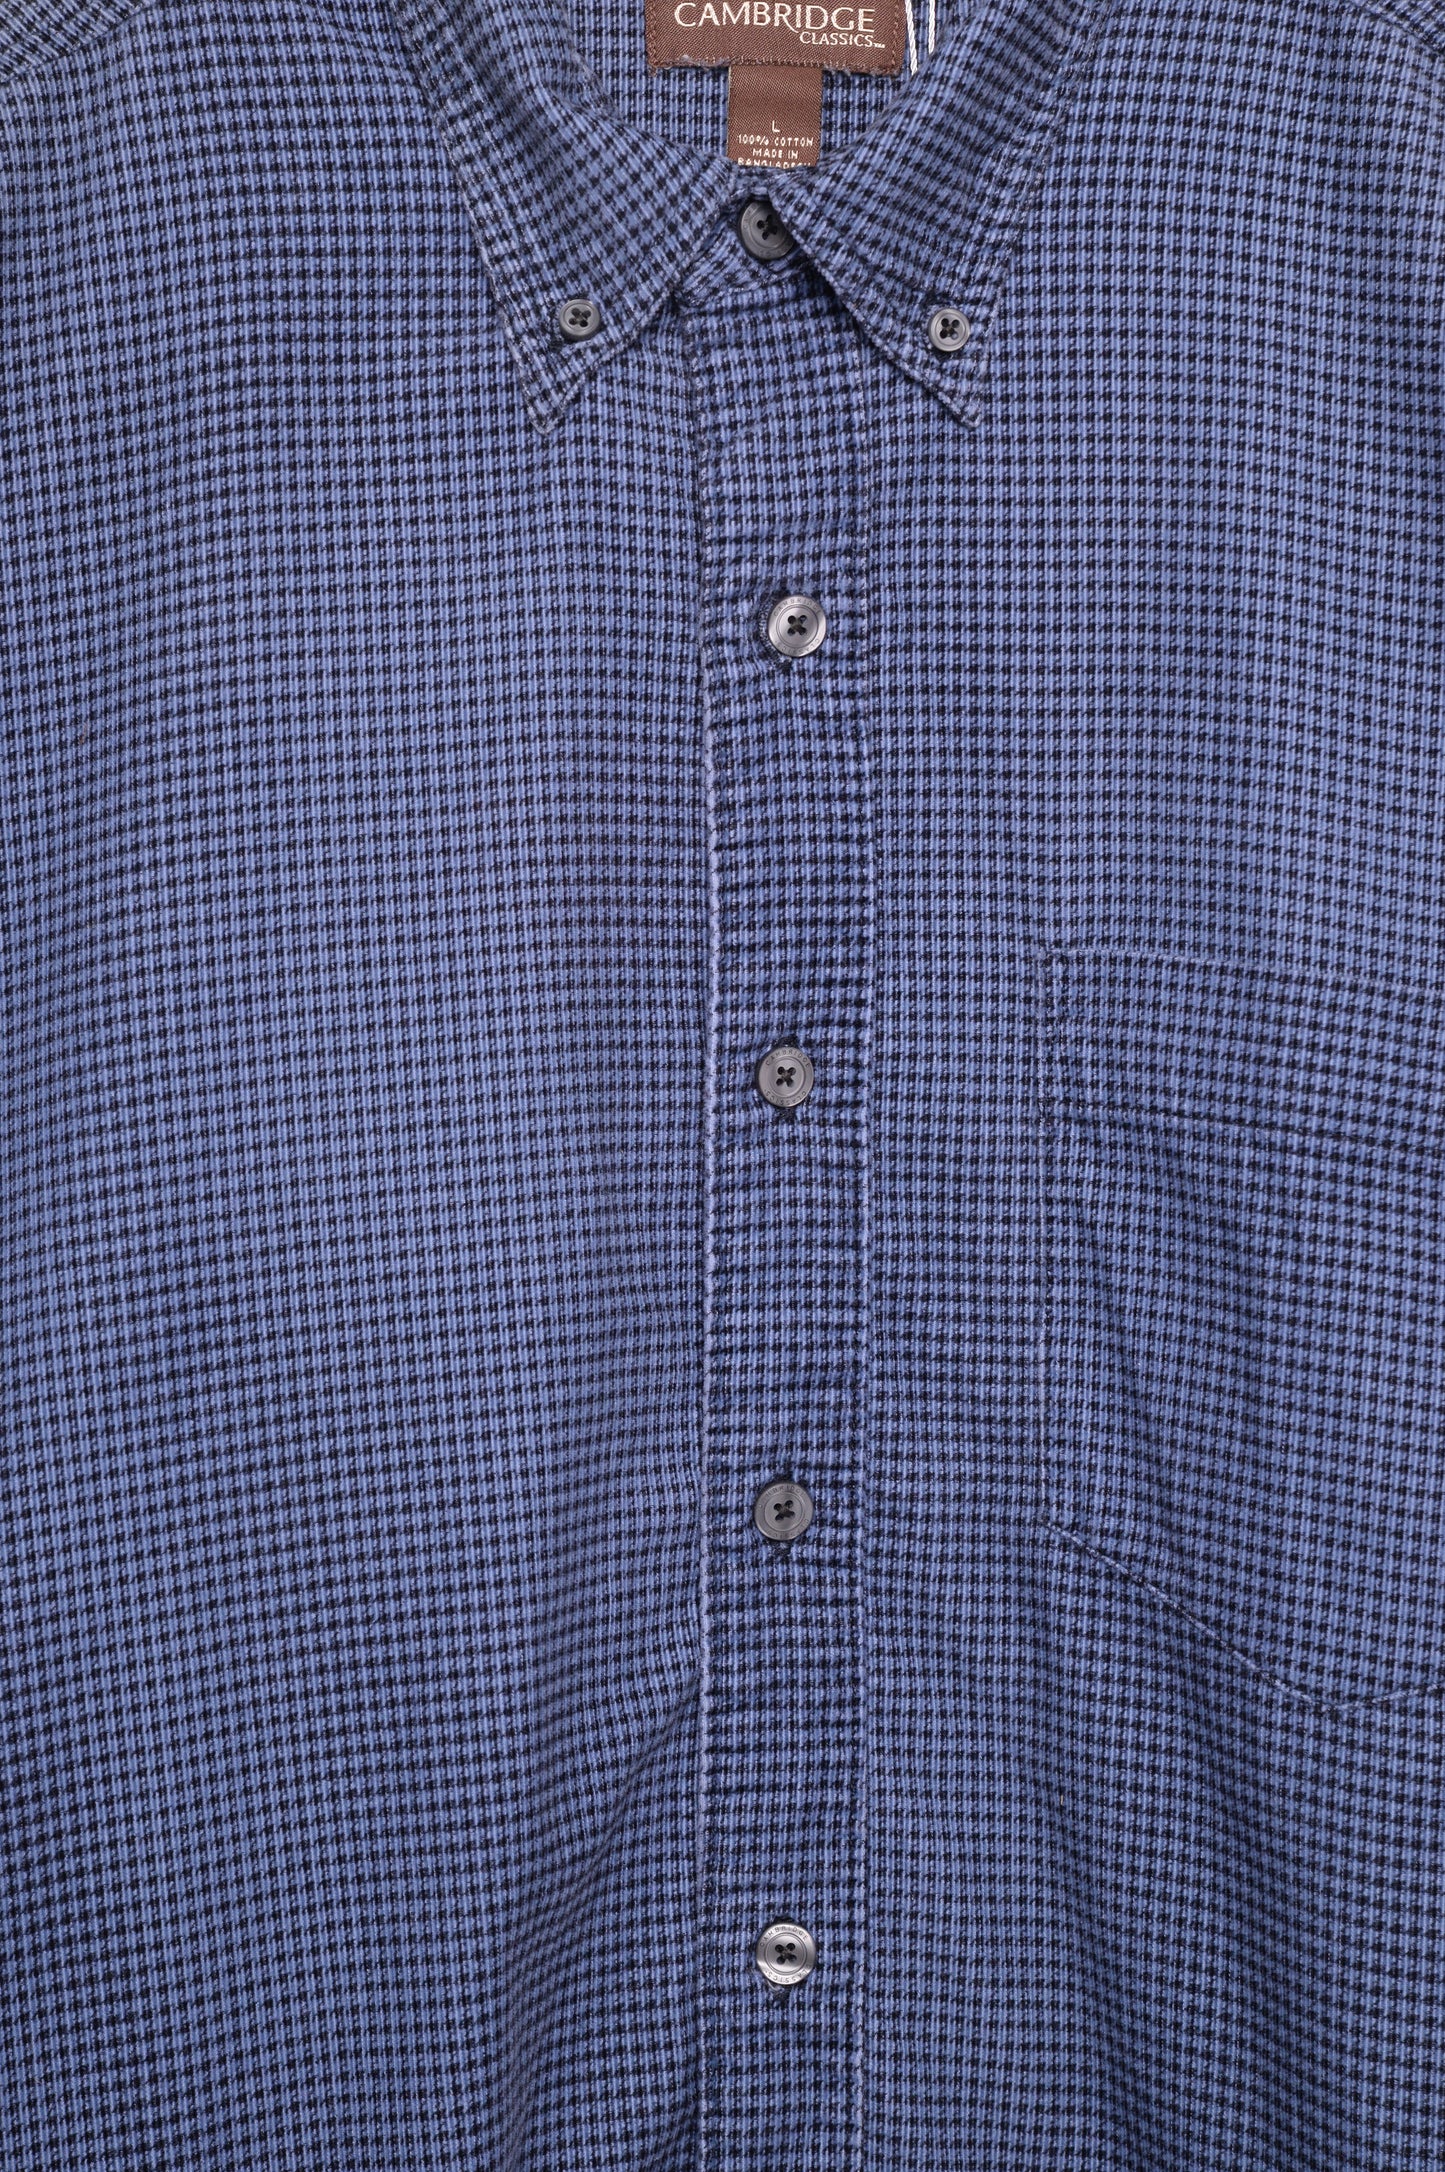 Houndstooth Corduroy Button Down